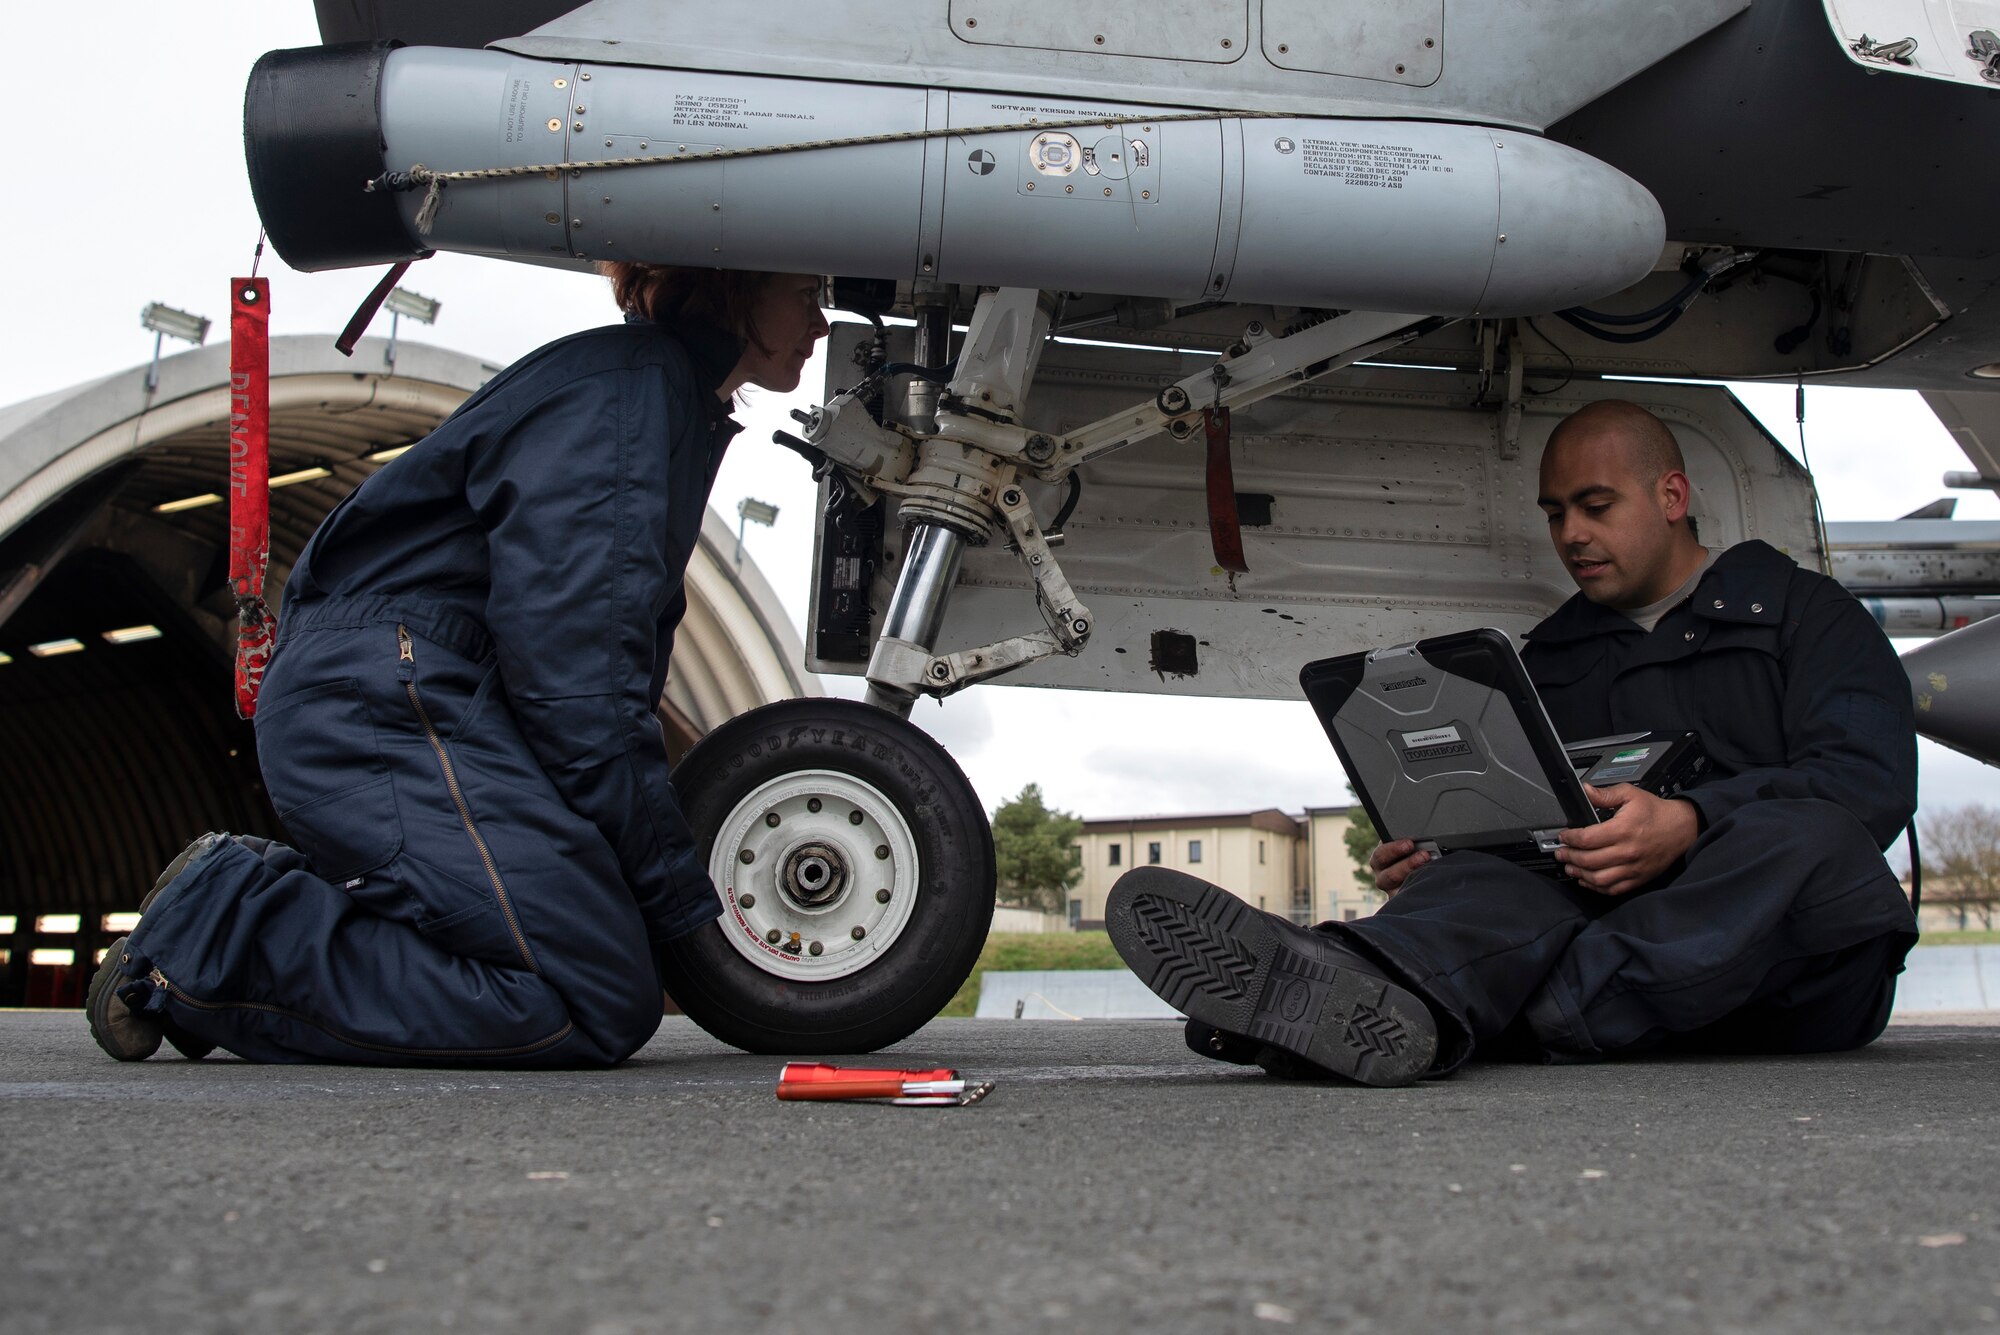 U.S. Air Force Staff Sgt. Stephanie Gillie, 52nd Security Forces Squadron investigator, left, observes Senior Airman Jose Pagan, 52nd Aircraft Maintenance Squadron assistant dedicated crew chief, right, as he inspects F-16 Fighting Falcon landing gear at Spangdahlem Air Base, Germany, April 3, 2019. Gillie, who had never been on a flightline before, volunteered for the 52nd AMXS Crew Chief for a Day program. She learned how inspections are performed and how to prepare an aircraft for launch. (U.S. Air Force photo by Airman 1st Class Valerie Seelye)